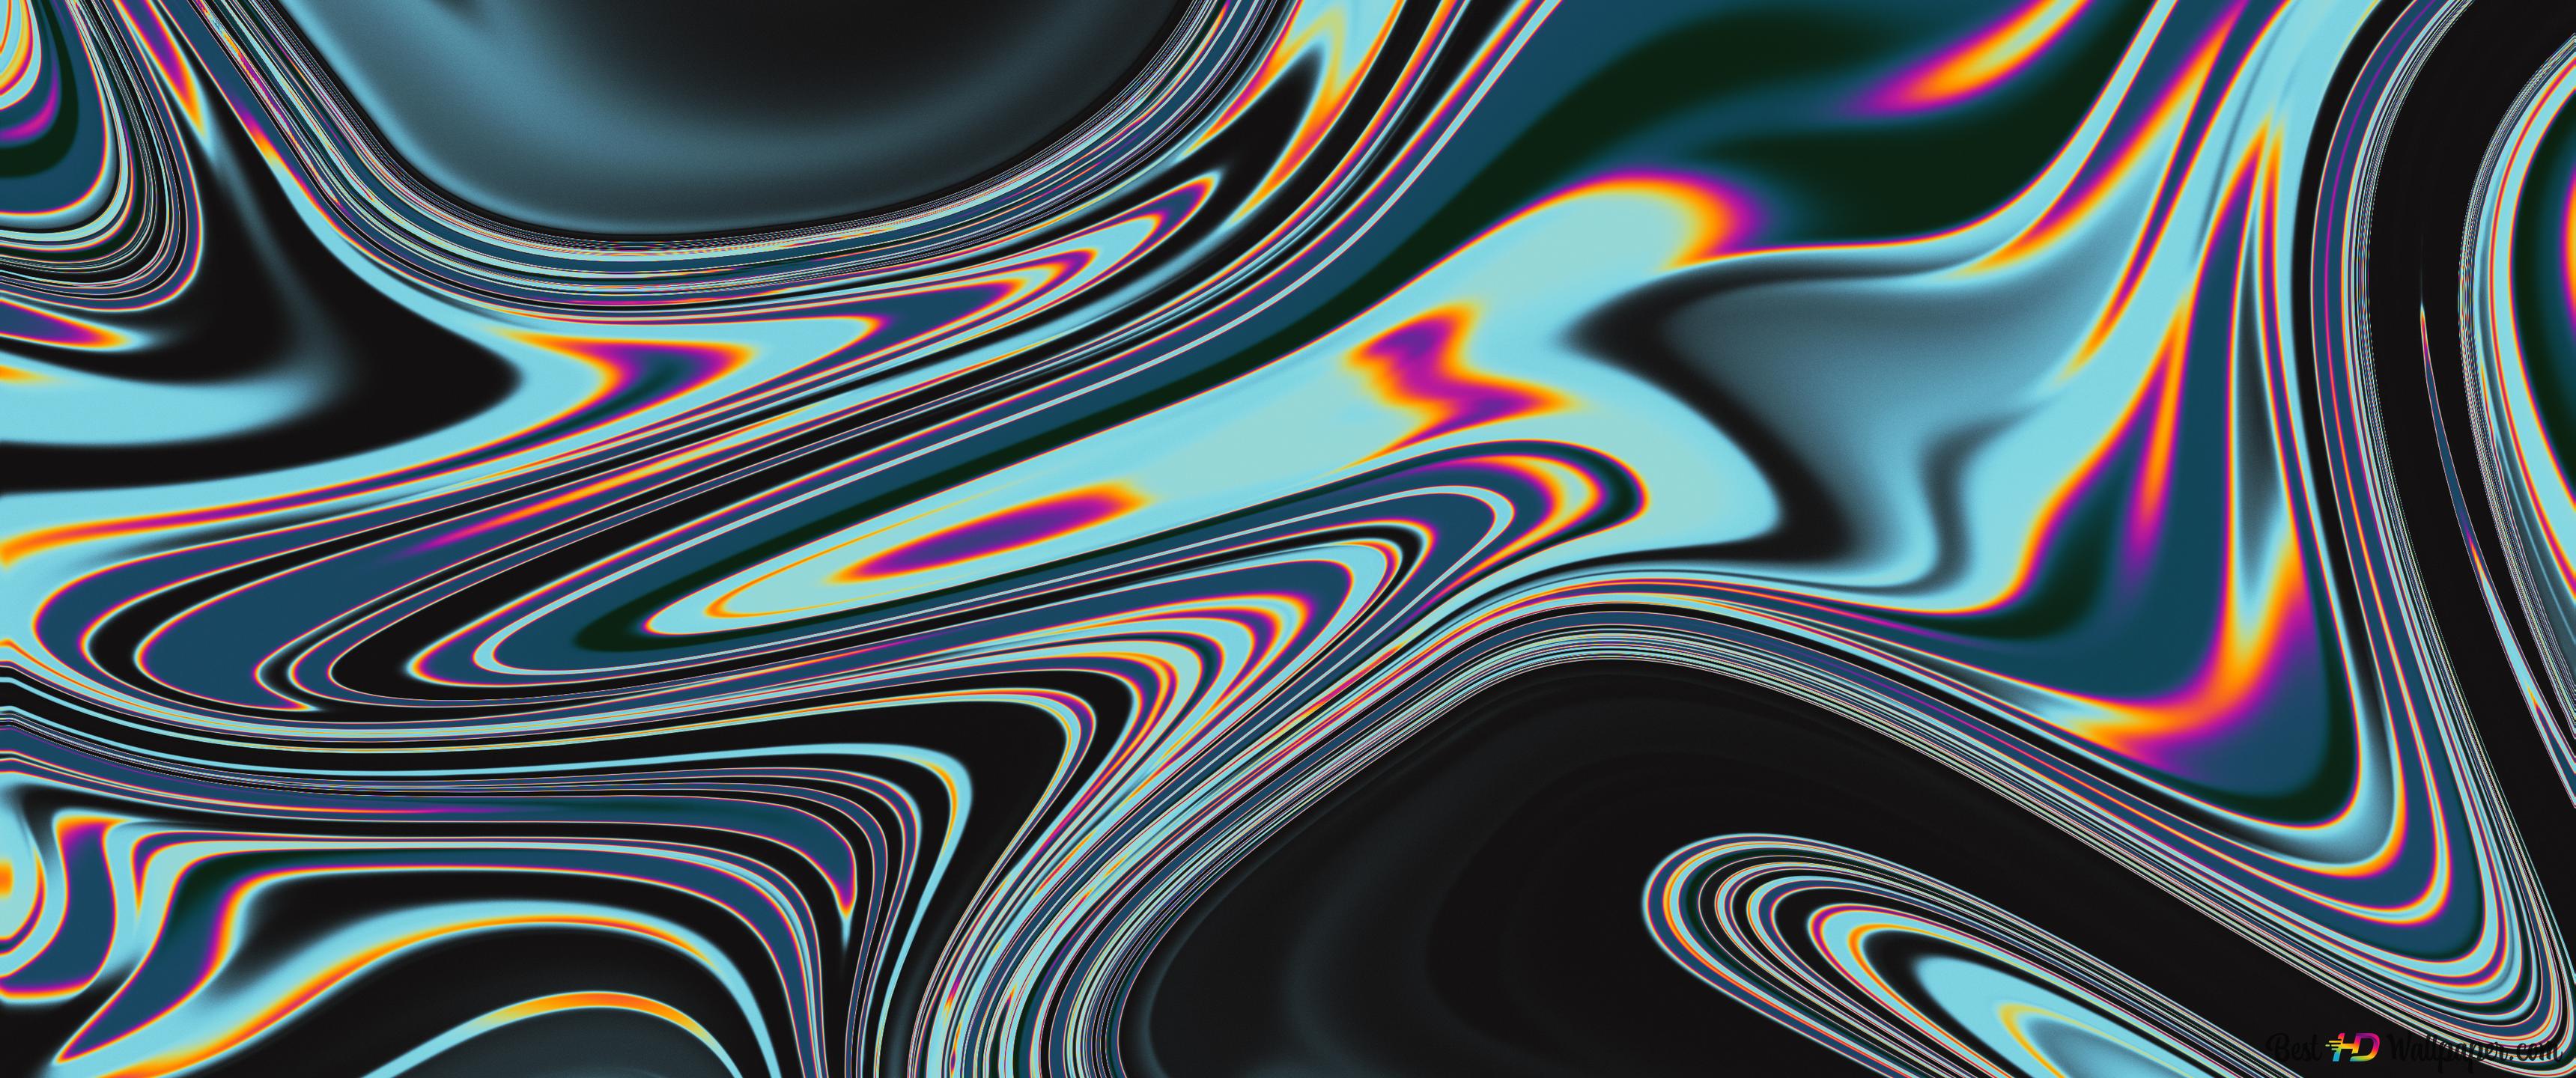 A colorful abstract design on black background - 3440x1440